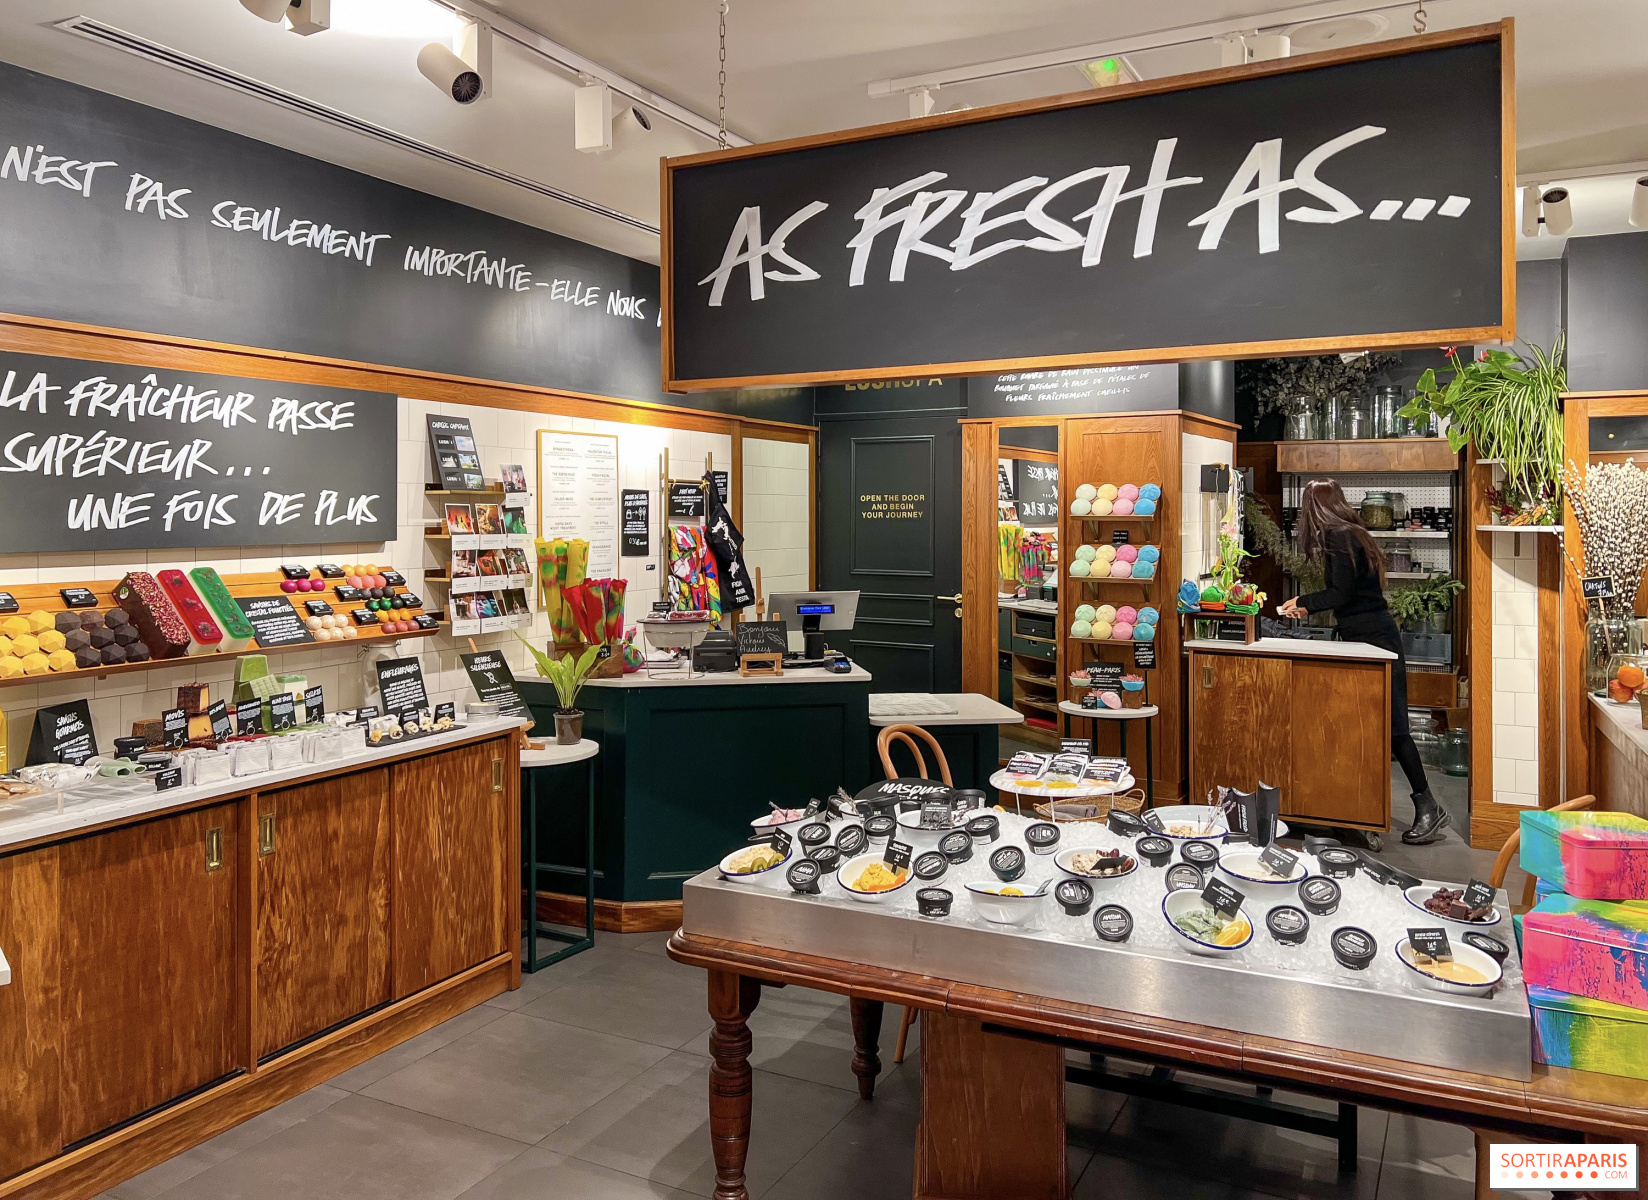 The Parisian concept store LUSH: fresh cosmetics, reasoned flowers and Spa!  